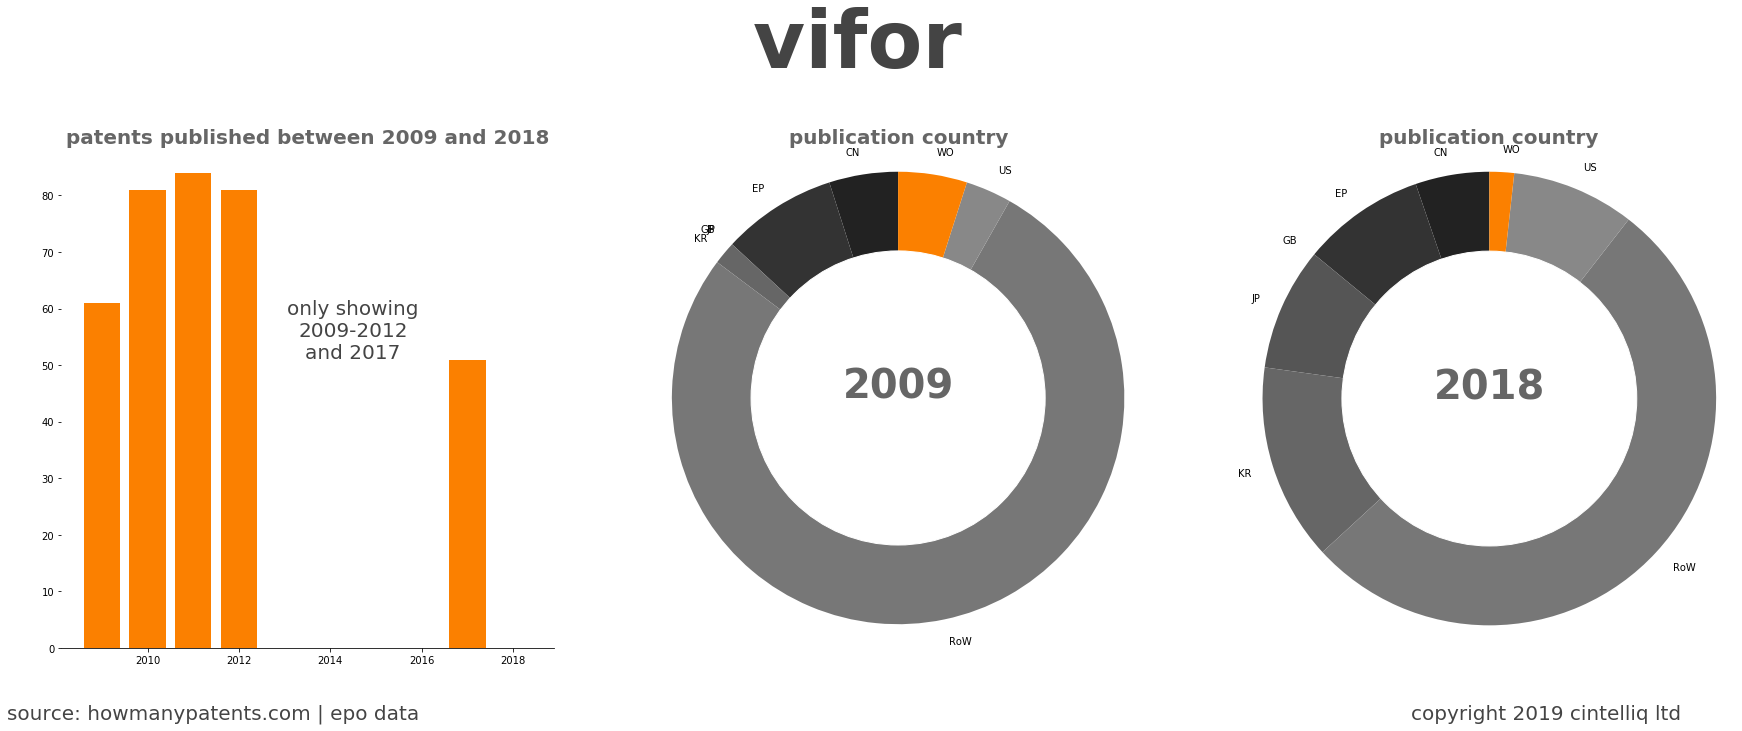 summary of patents for Vifor 